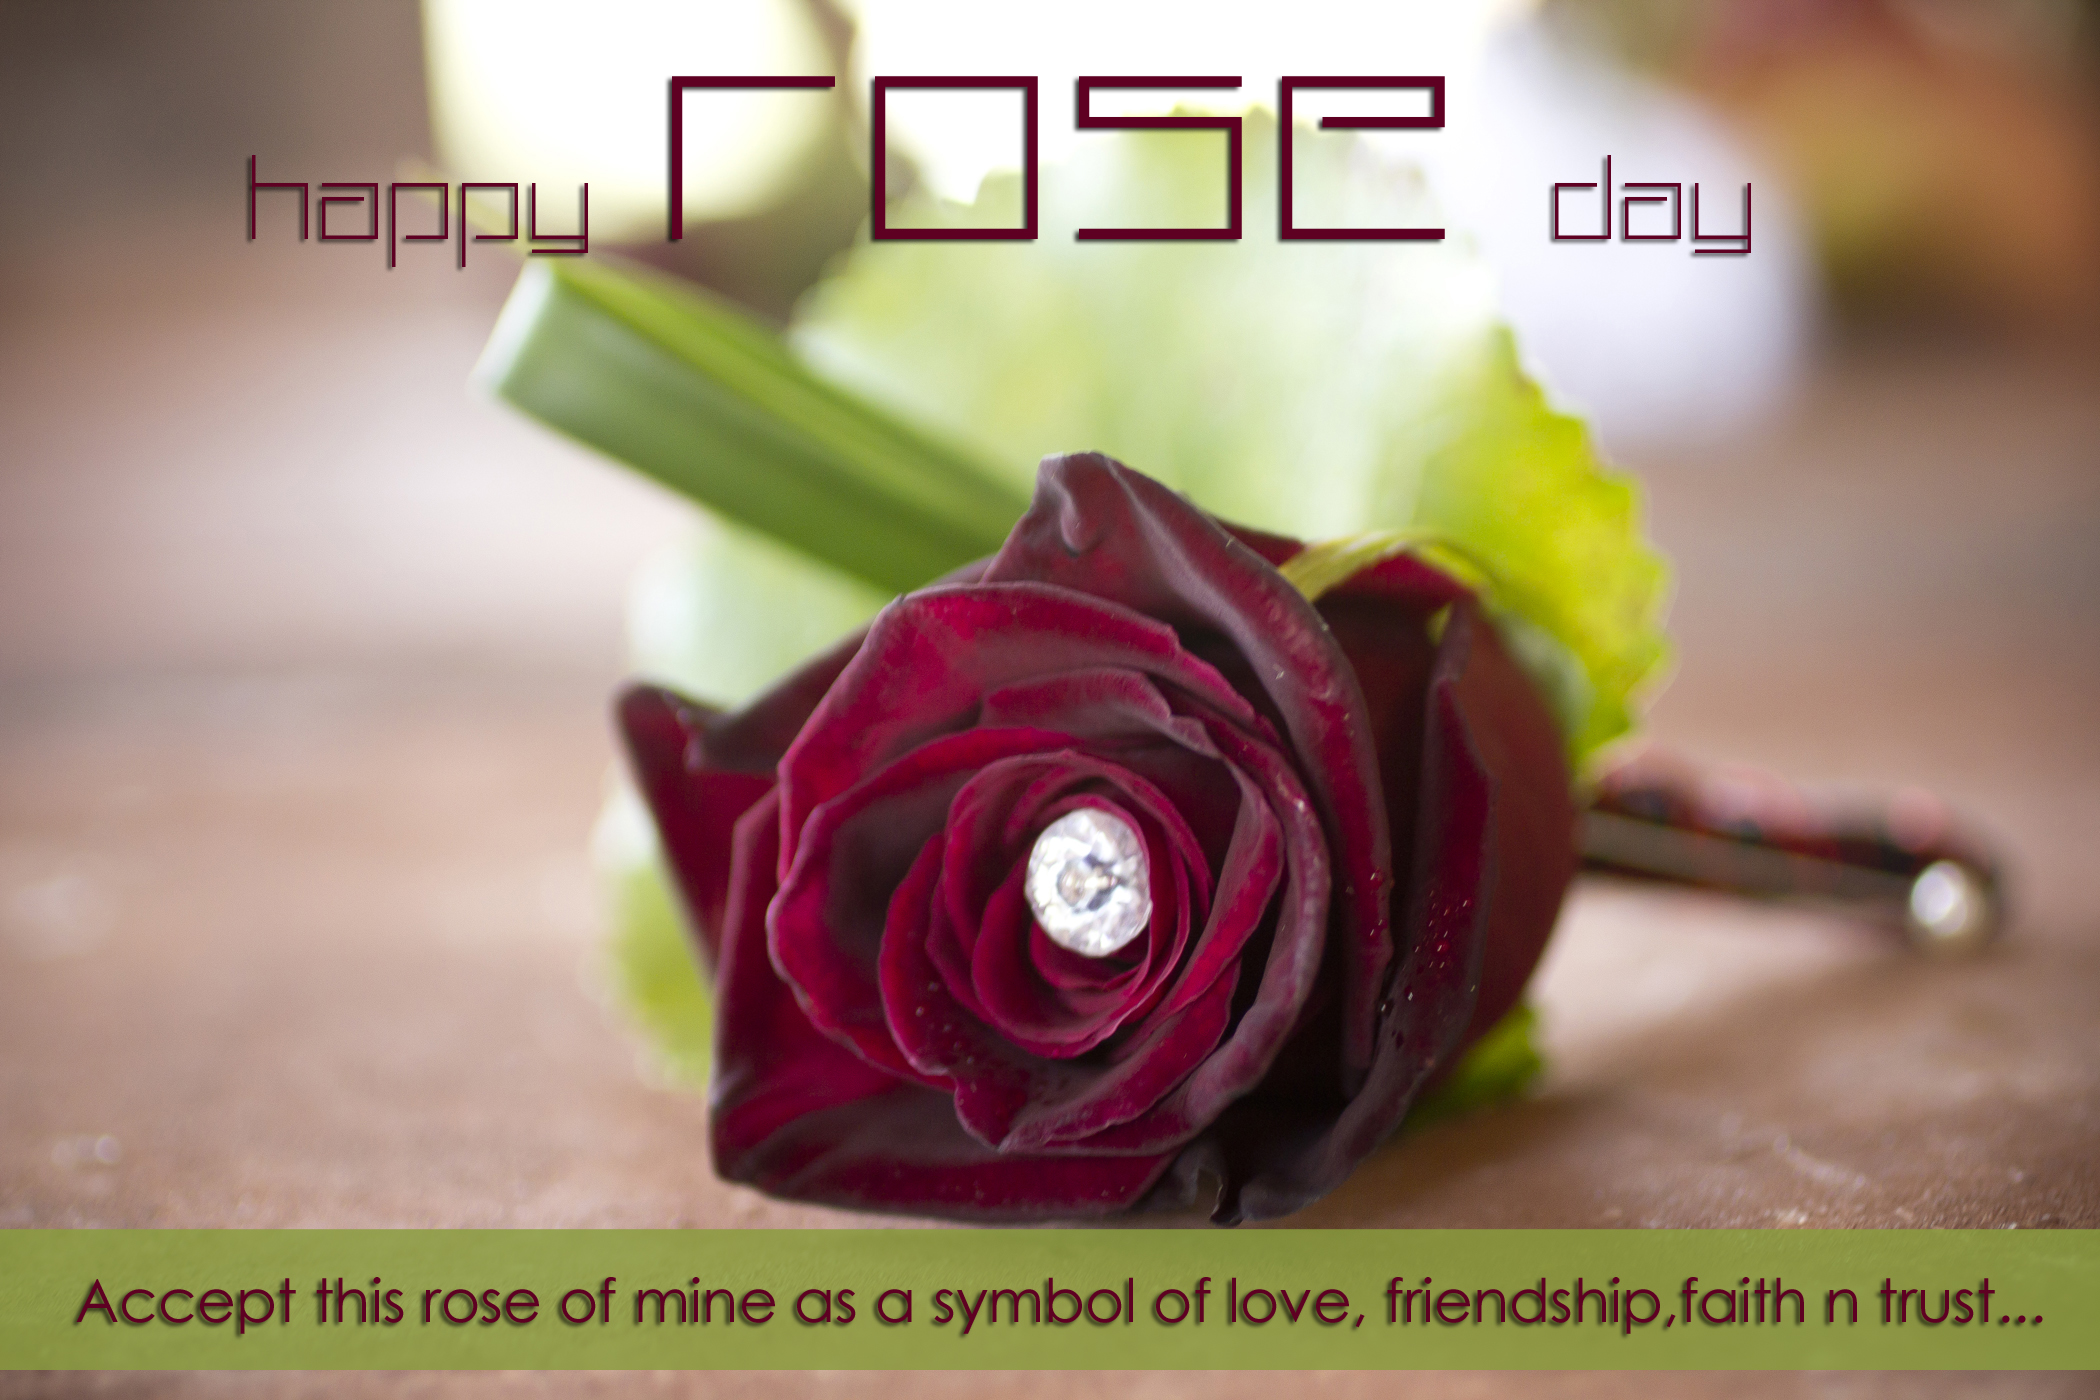 Happy Rose Day Hd , HD Wallpaper & Backgrounds